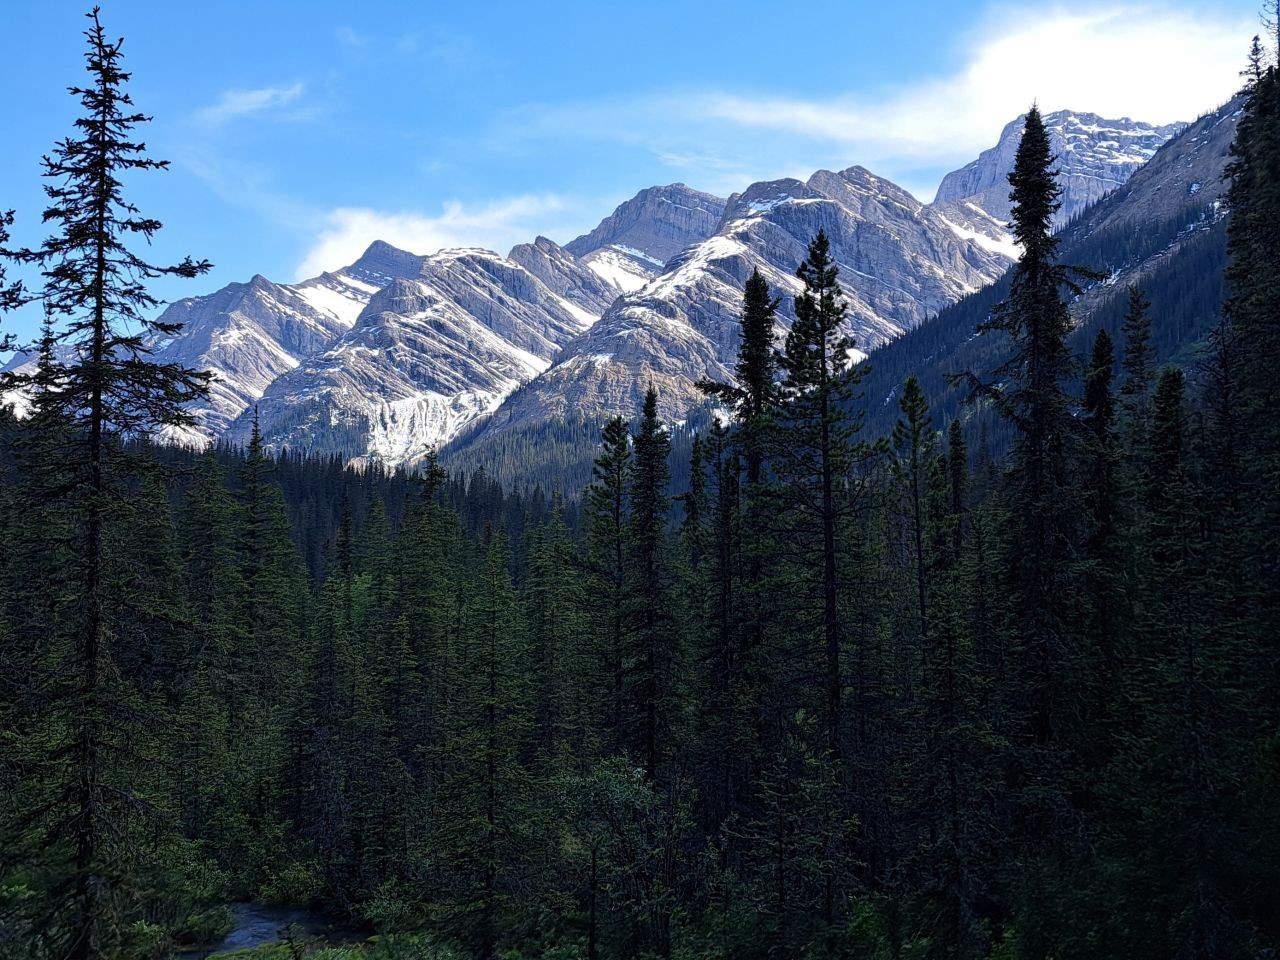 There are numerous awe inspiring mountain vistas on the trail to Jacques Lake in Jasper National Park.